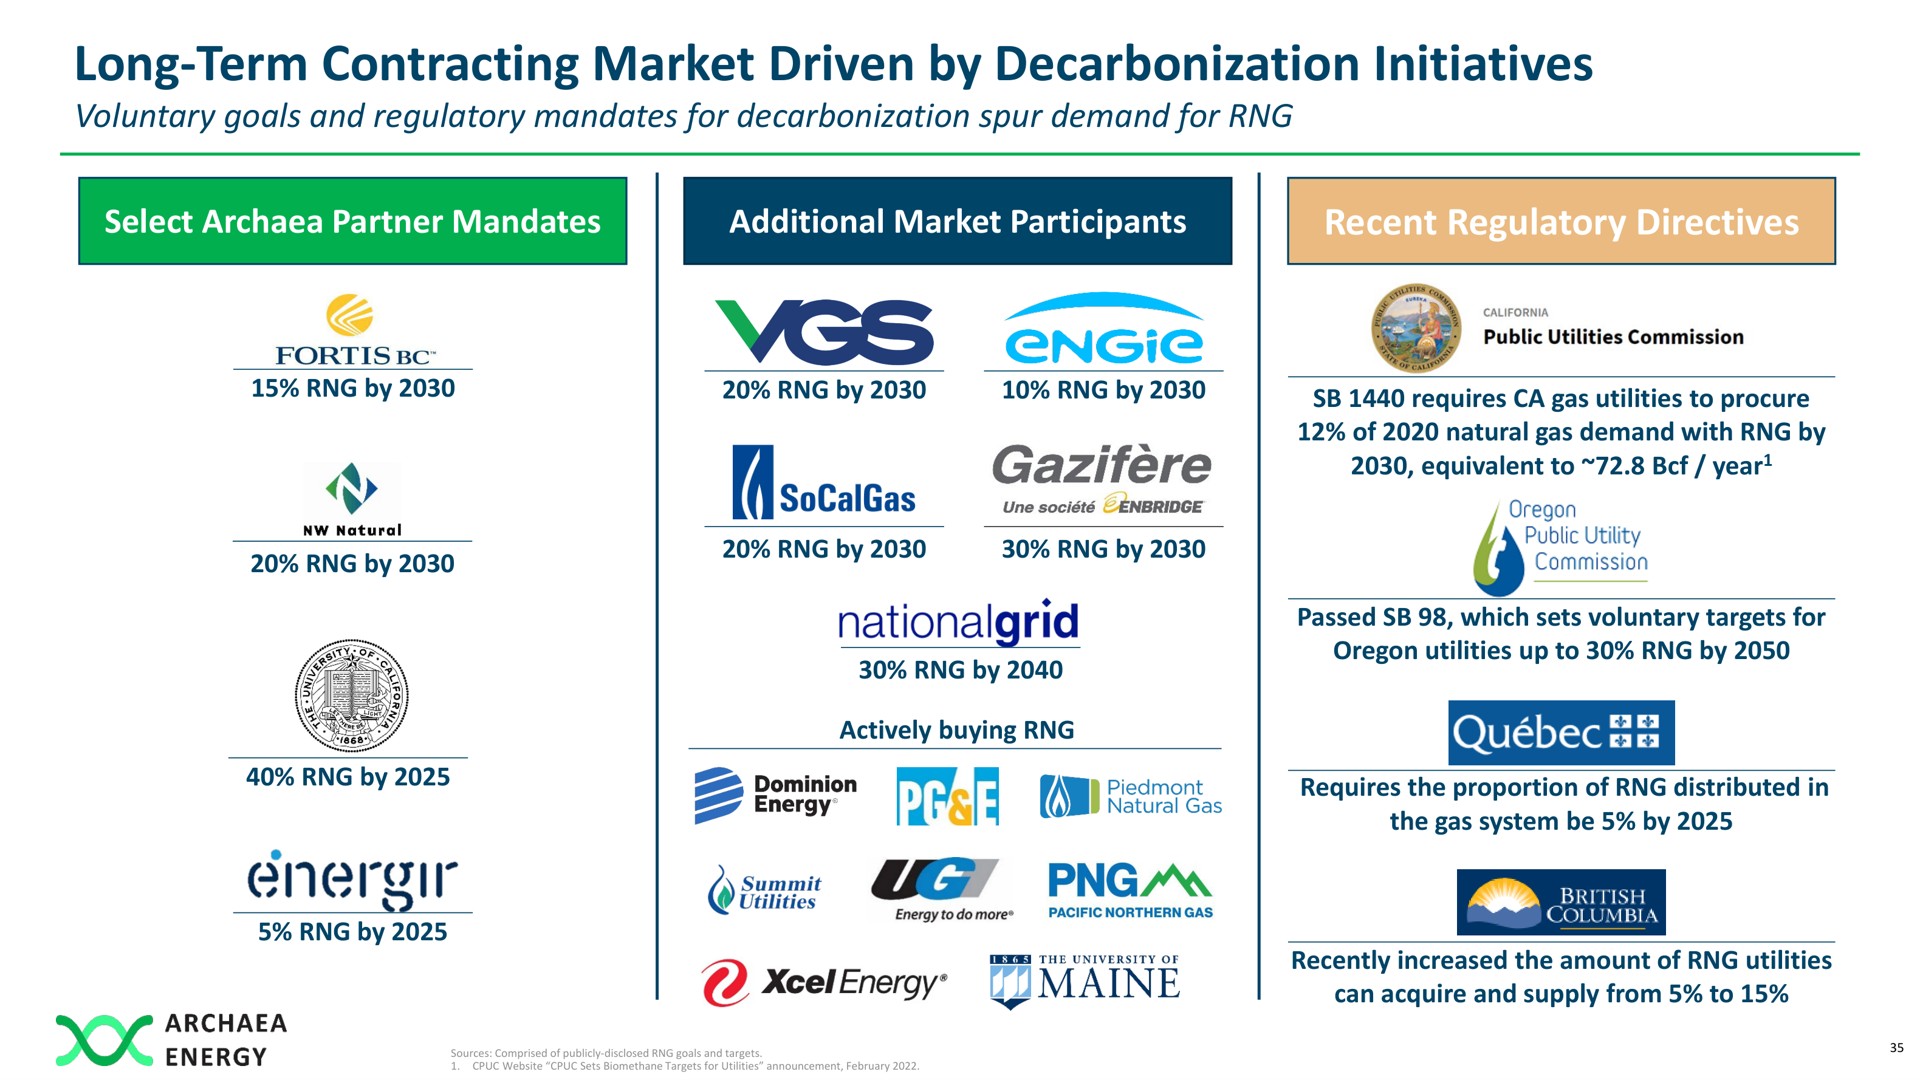 long term contracting market driven by decarbonization initiatives a vss summit gey epee | Archaea Energy